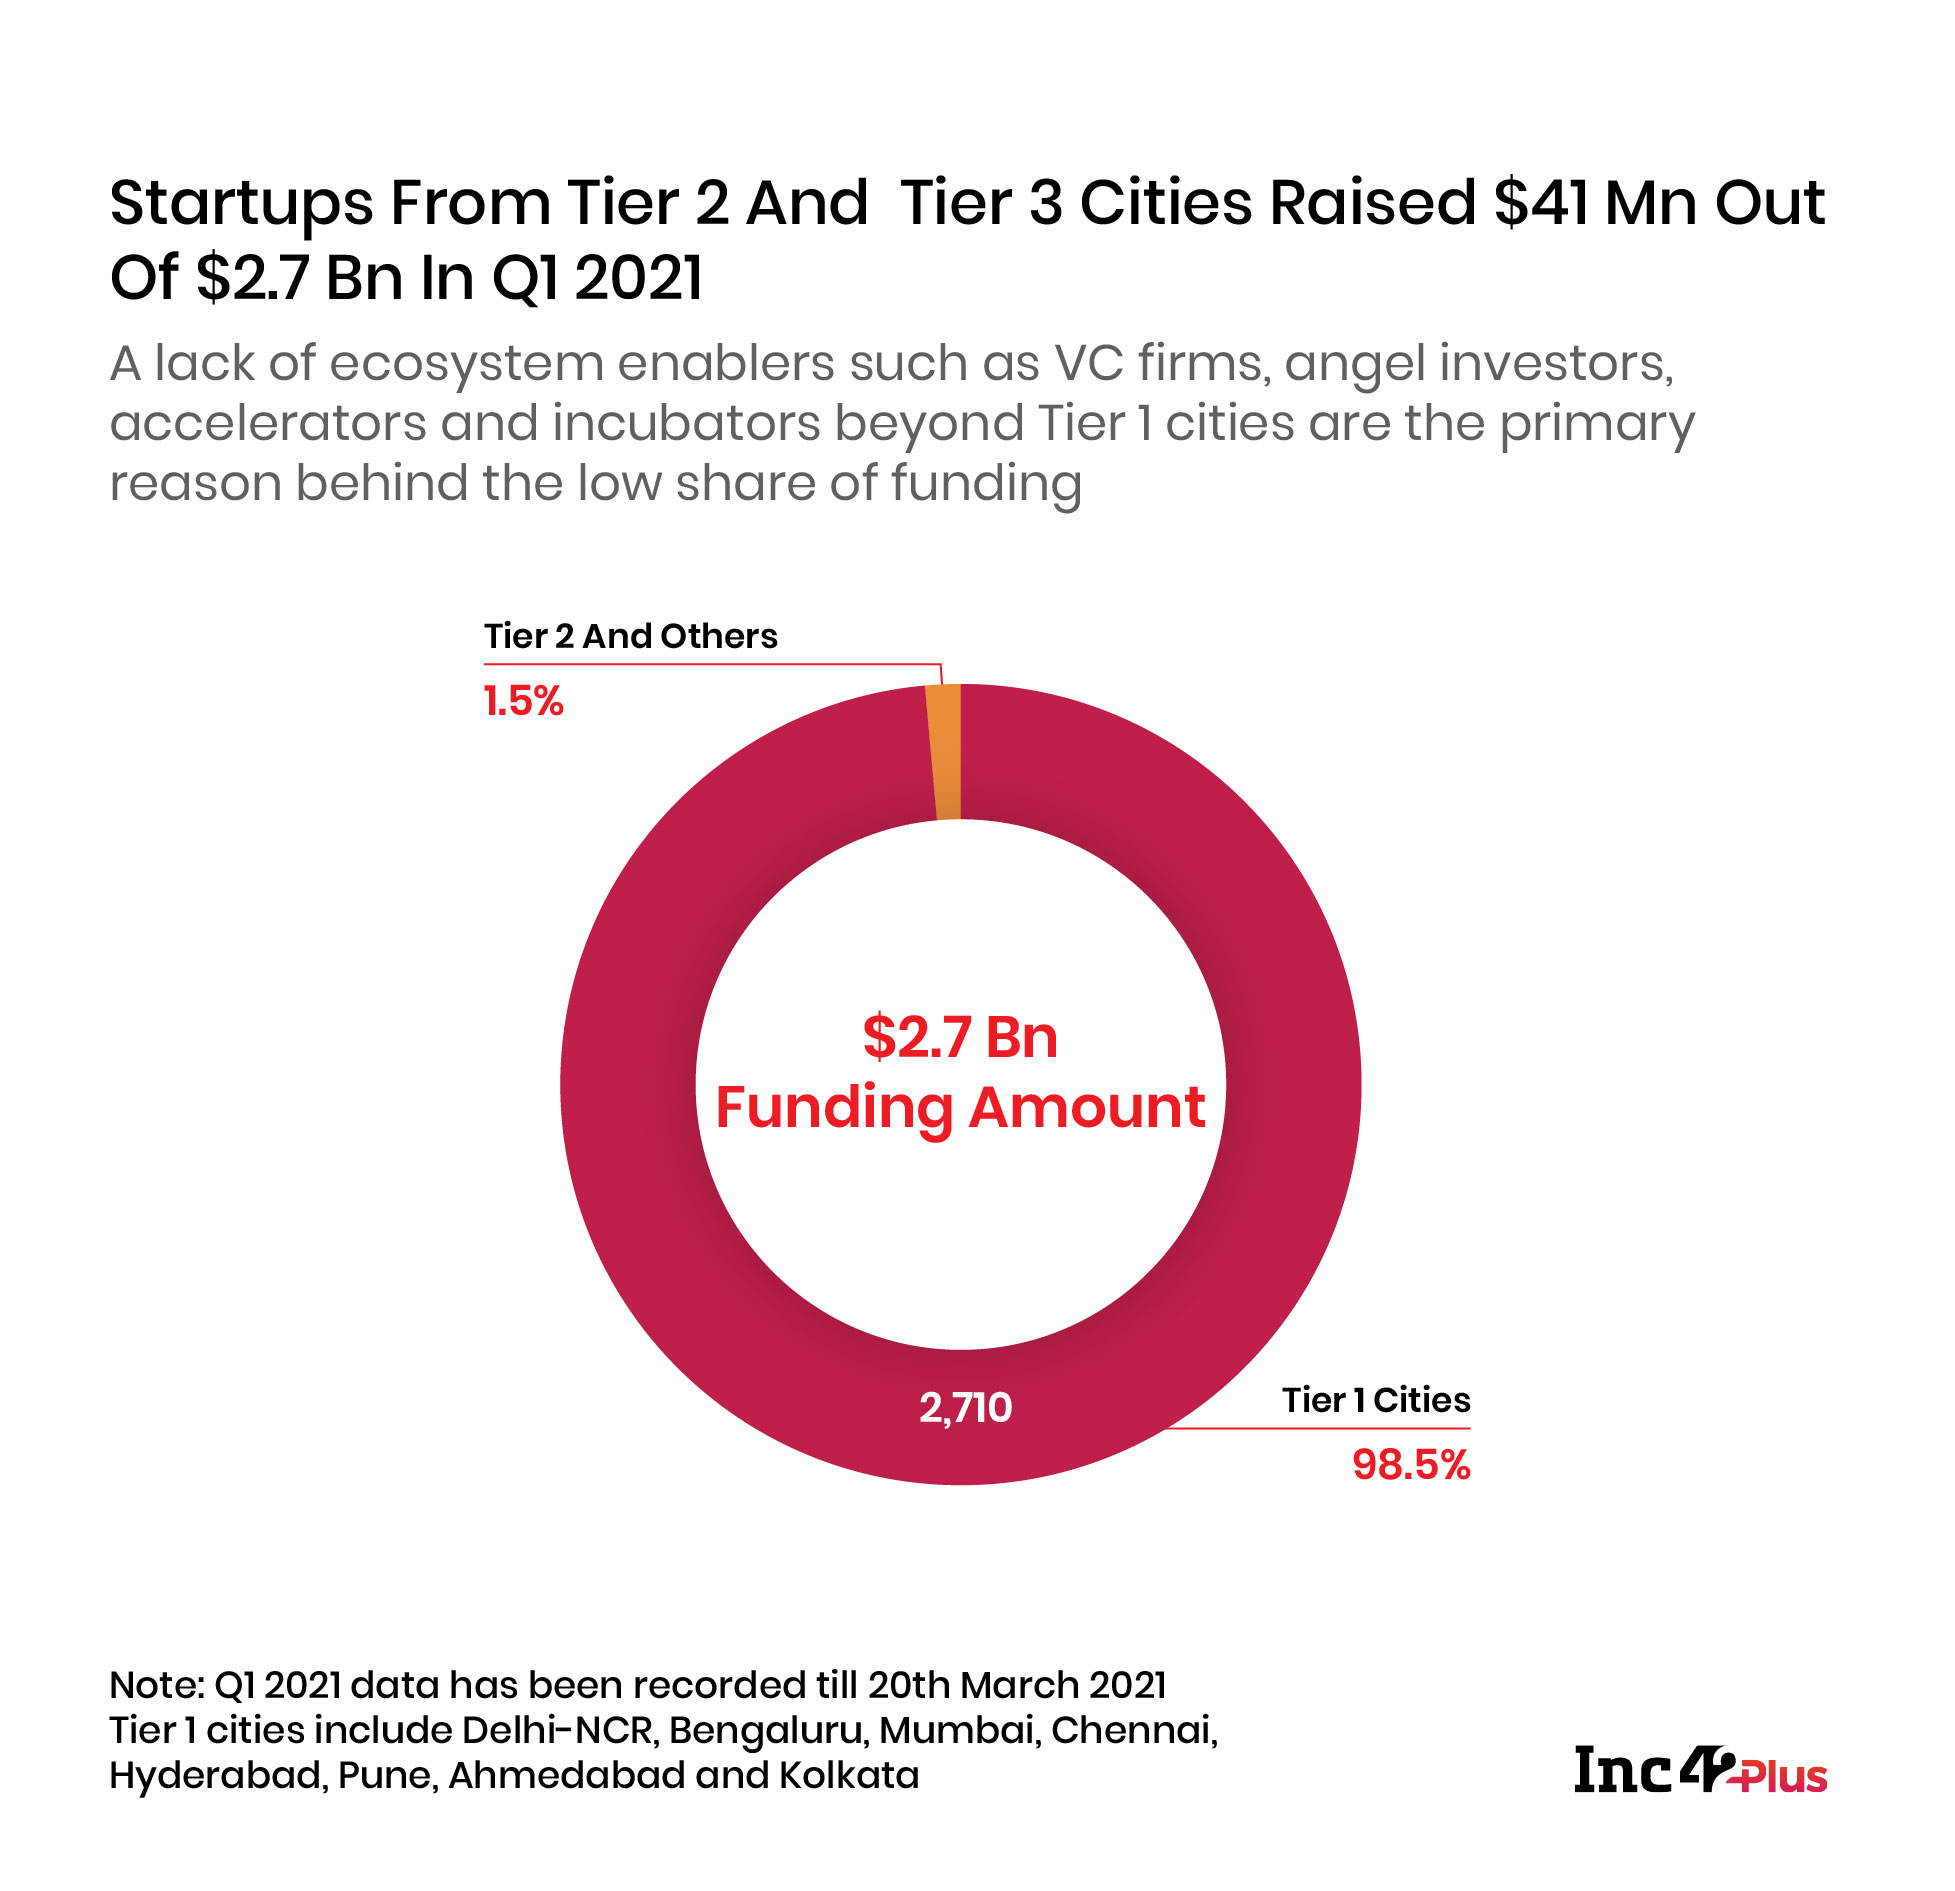 Startups From Tier 2 And Tier 3 Cities Raised $41 Mn Out Of $2.7 Bn In Q1 2021 